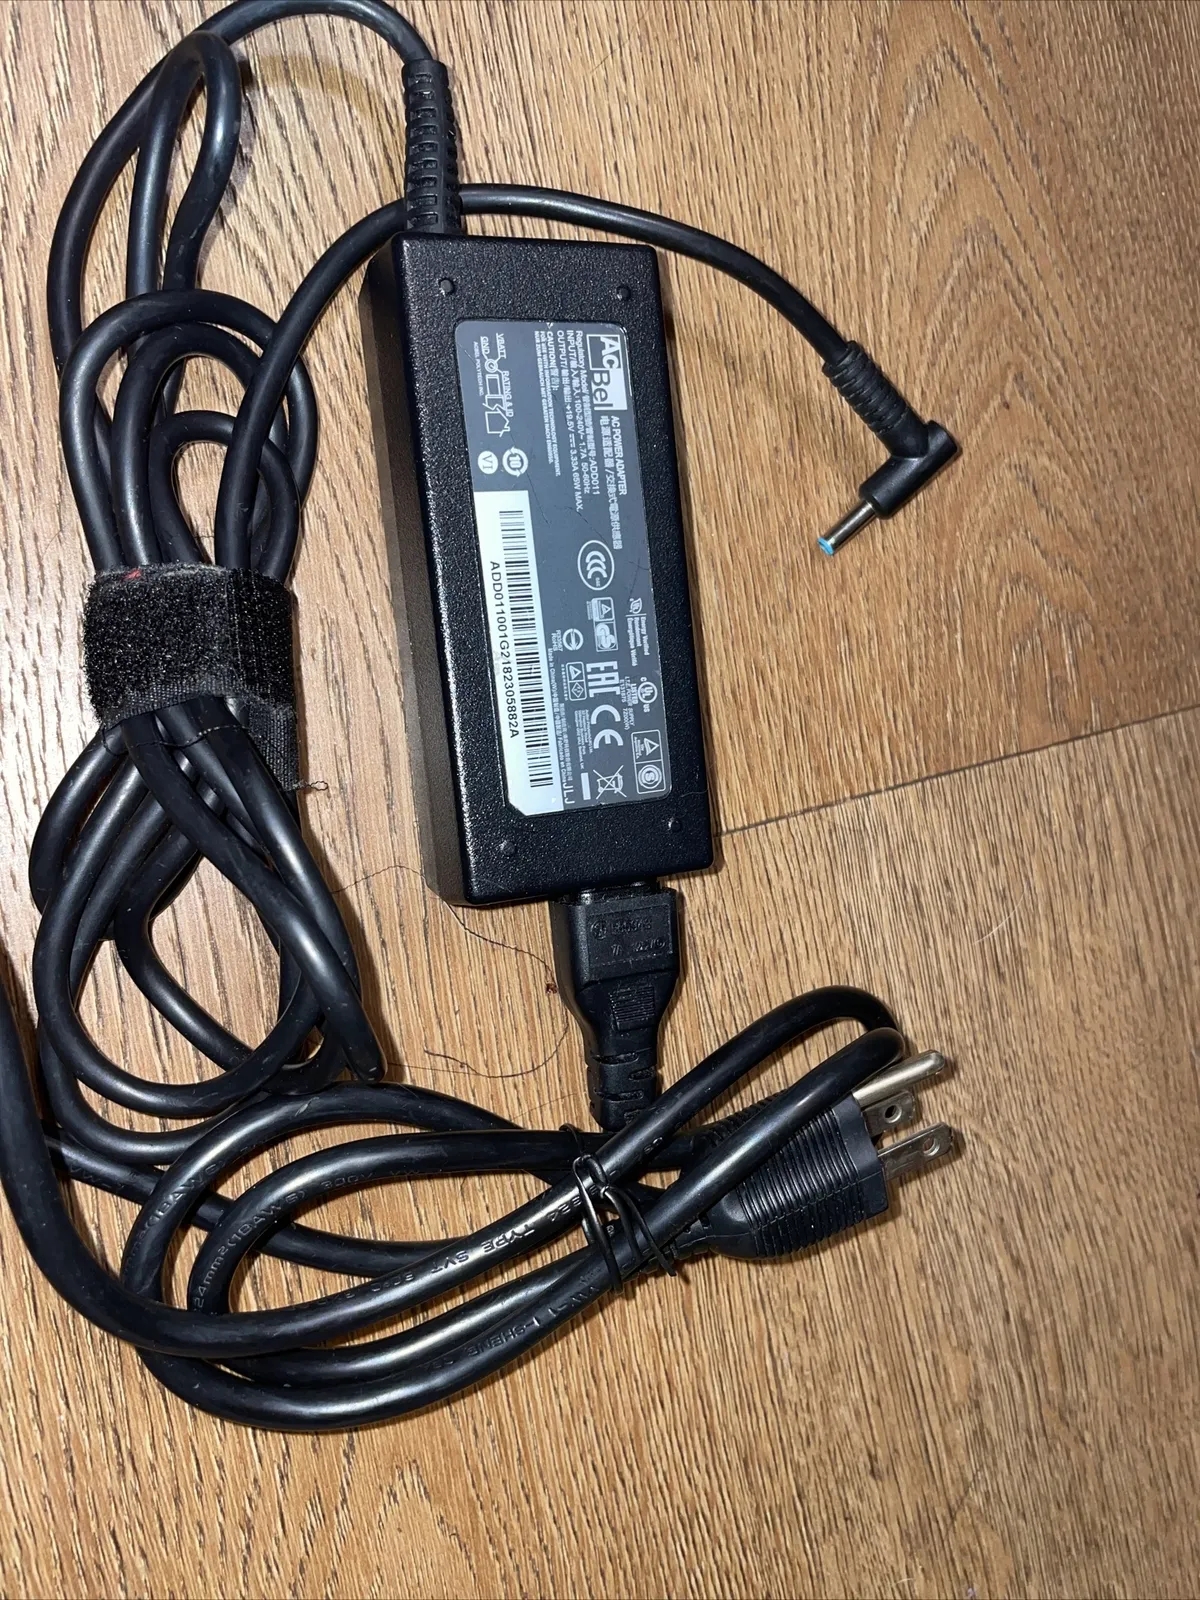 *Brand NEW*ACBEL 19.5V 3.33A AC ADAPTER ADD011 Power Supply